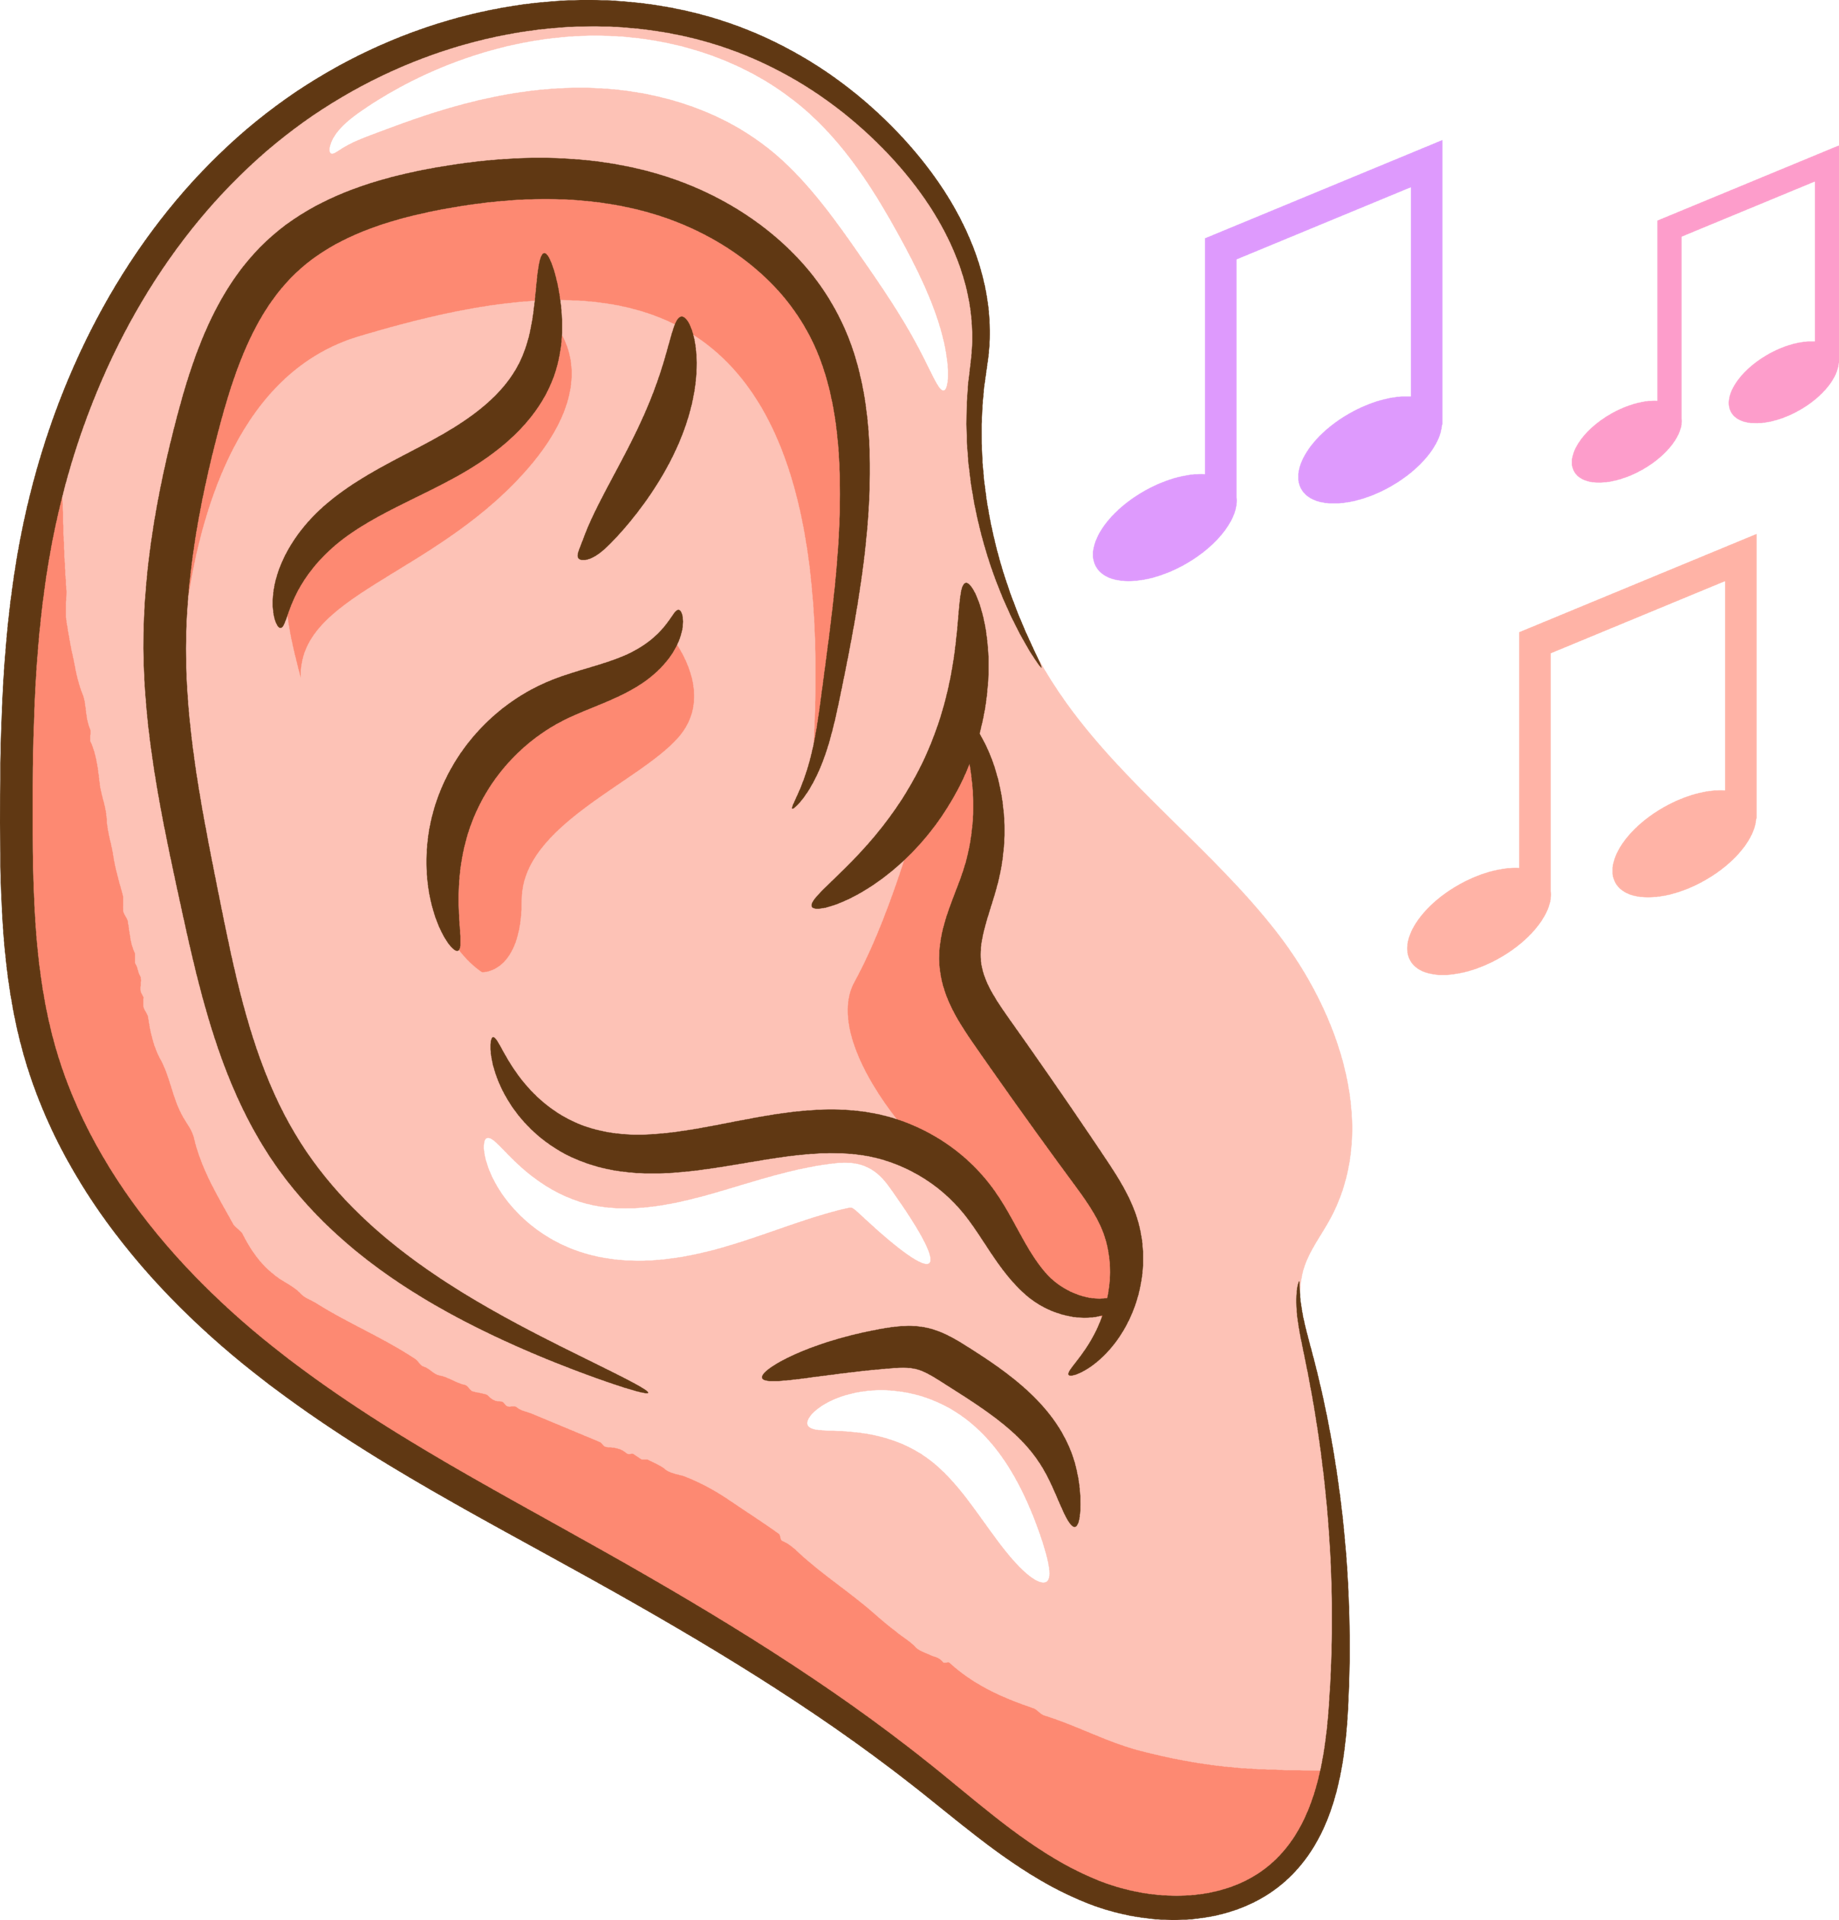 Ear Listening Graphic Clipart Design 19806666 Png